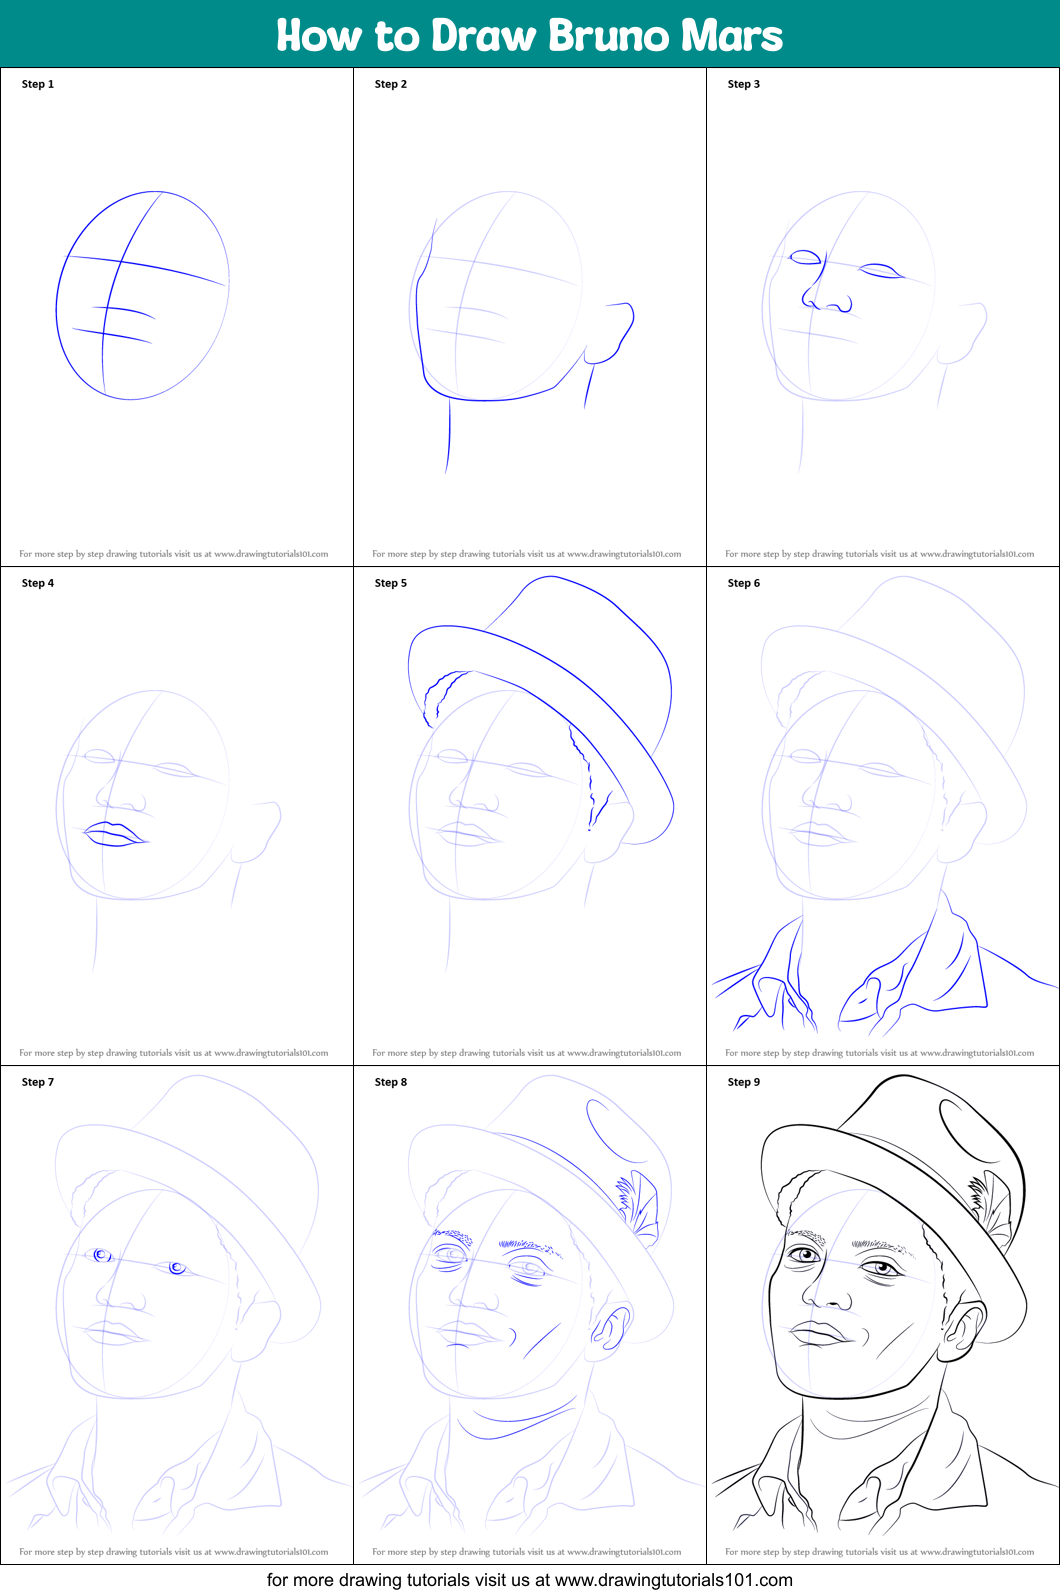 How to Draw Bruno Mars printable step by step drawing sheet